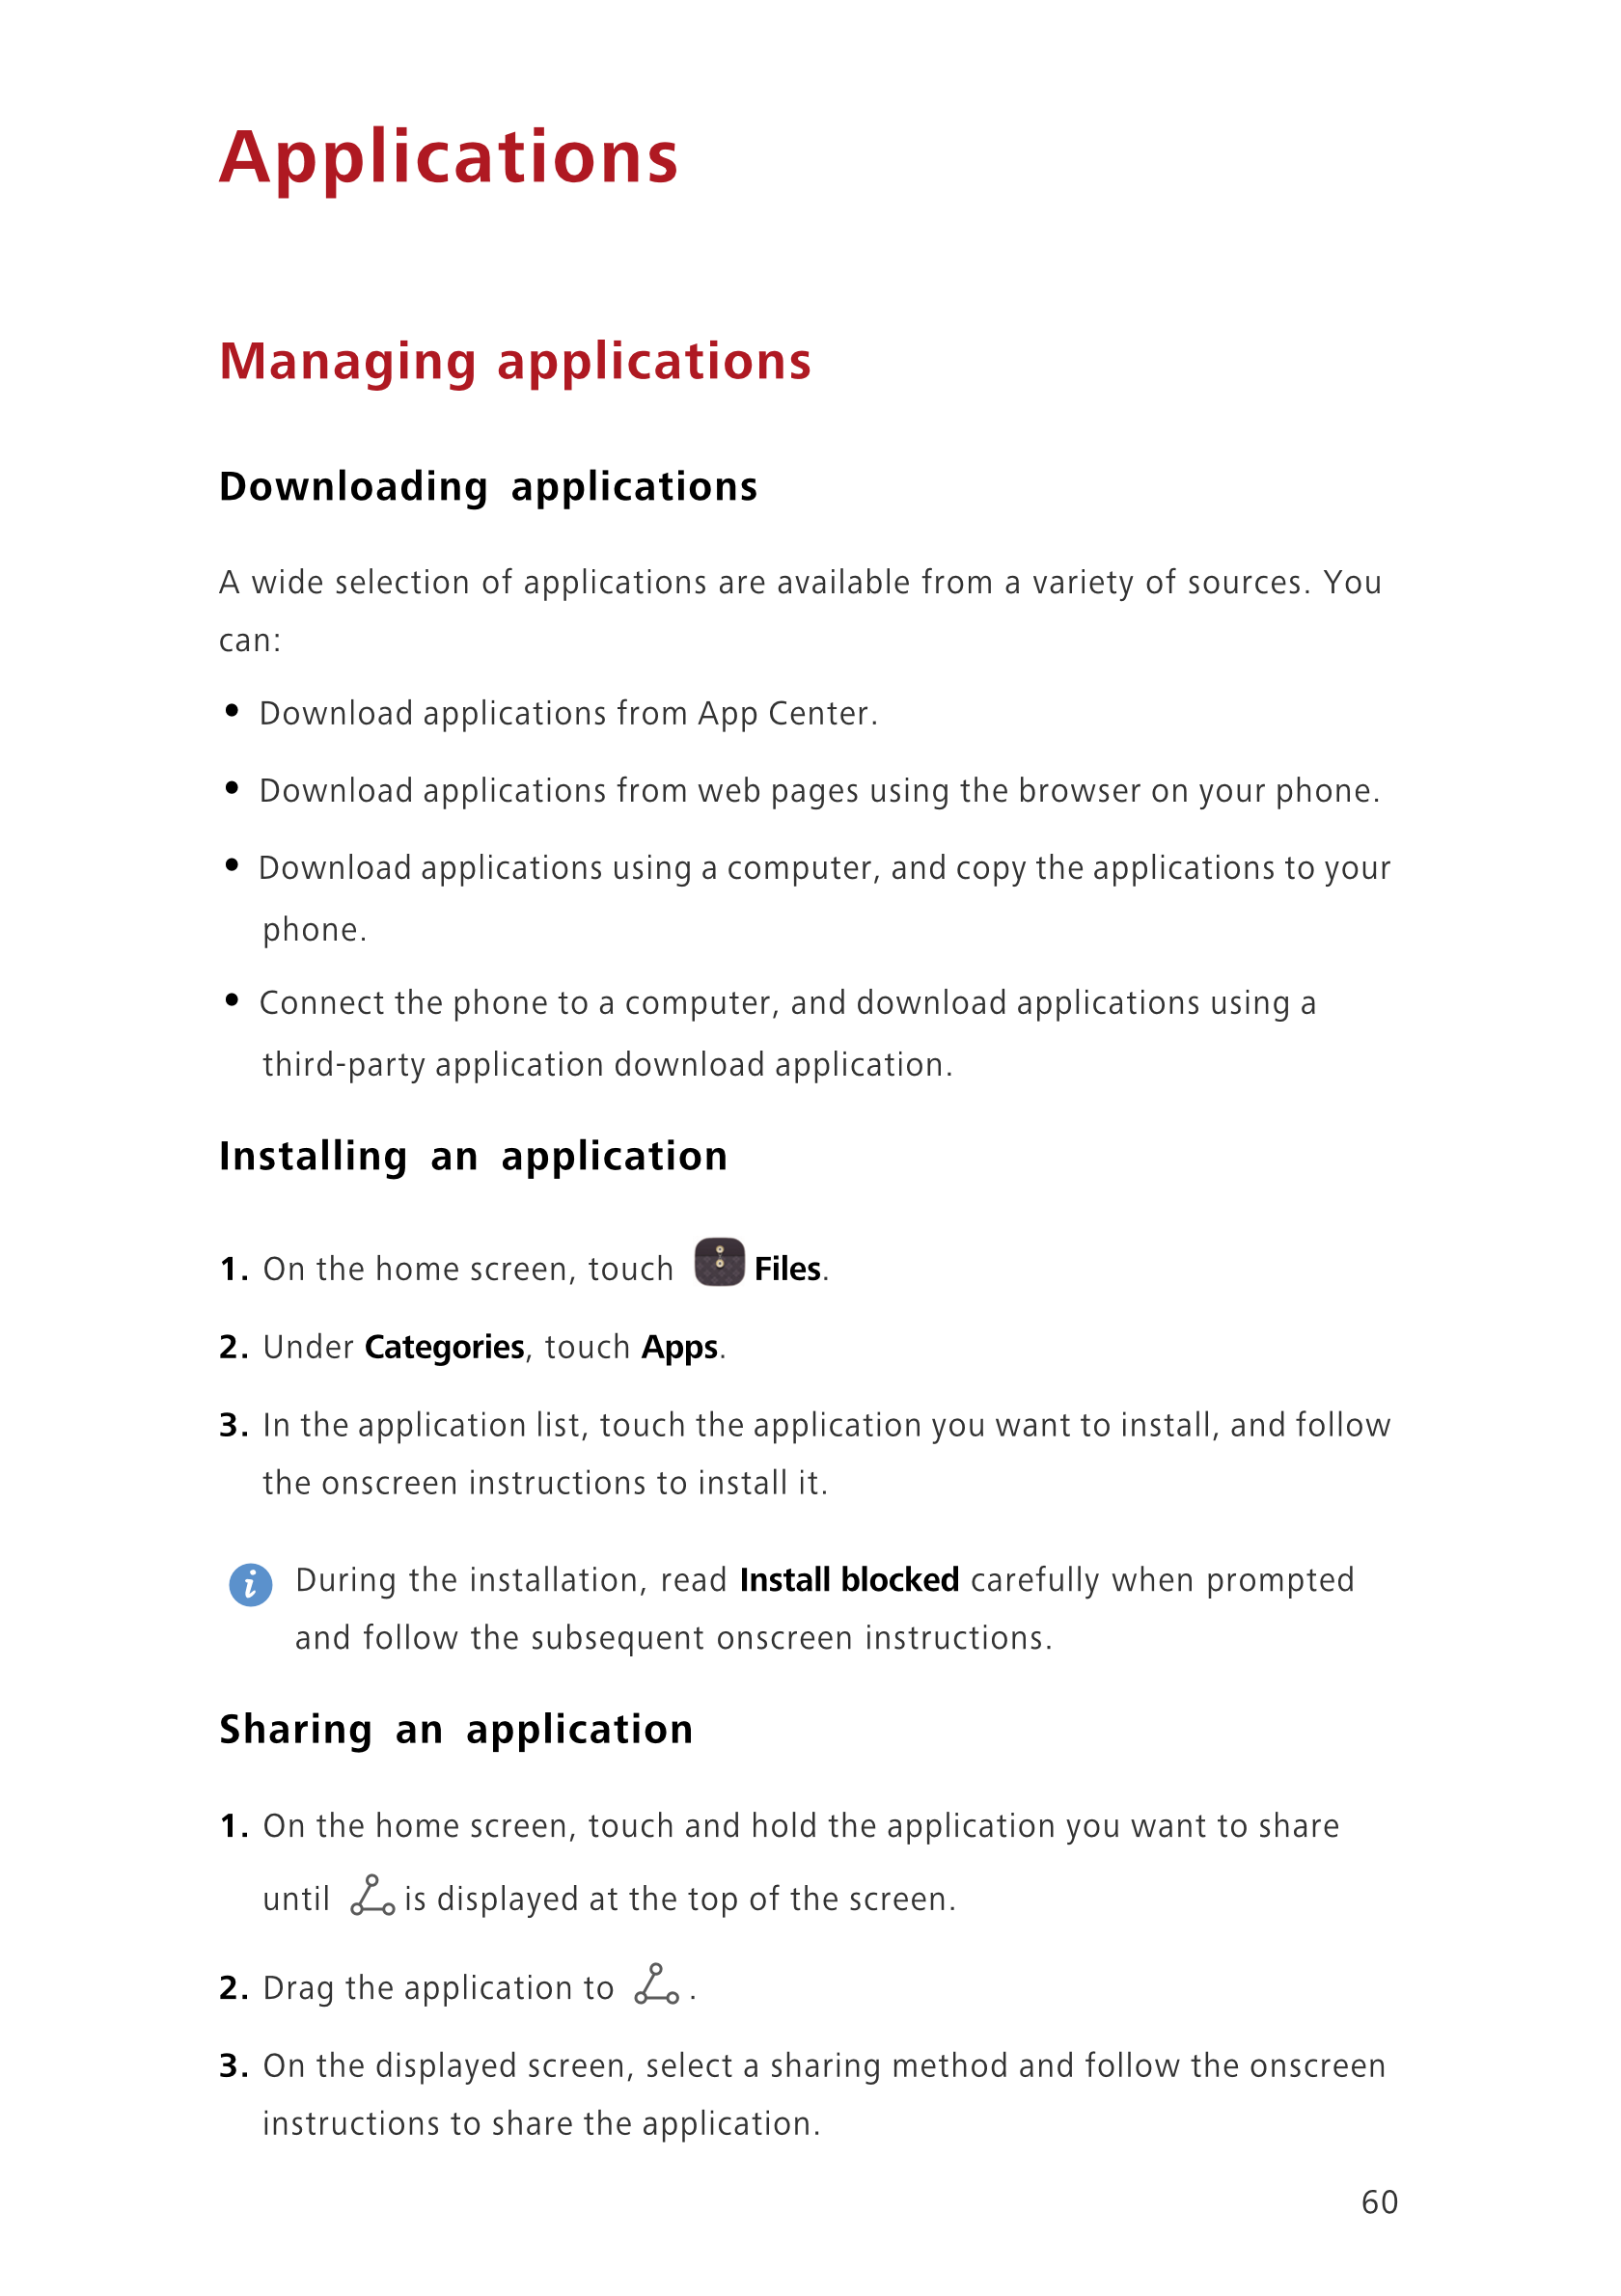 Applications
Managing applications
Downloading applications
A wide selection of applications are available from a variety of sou